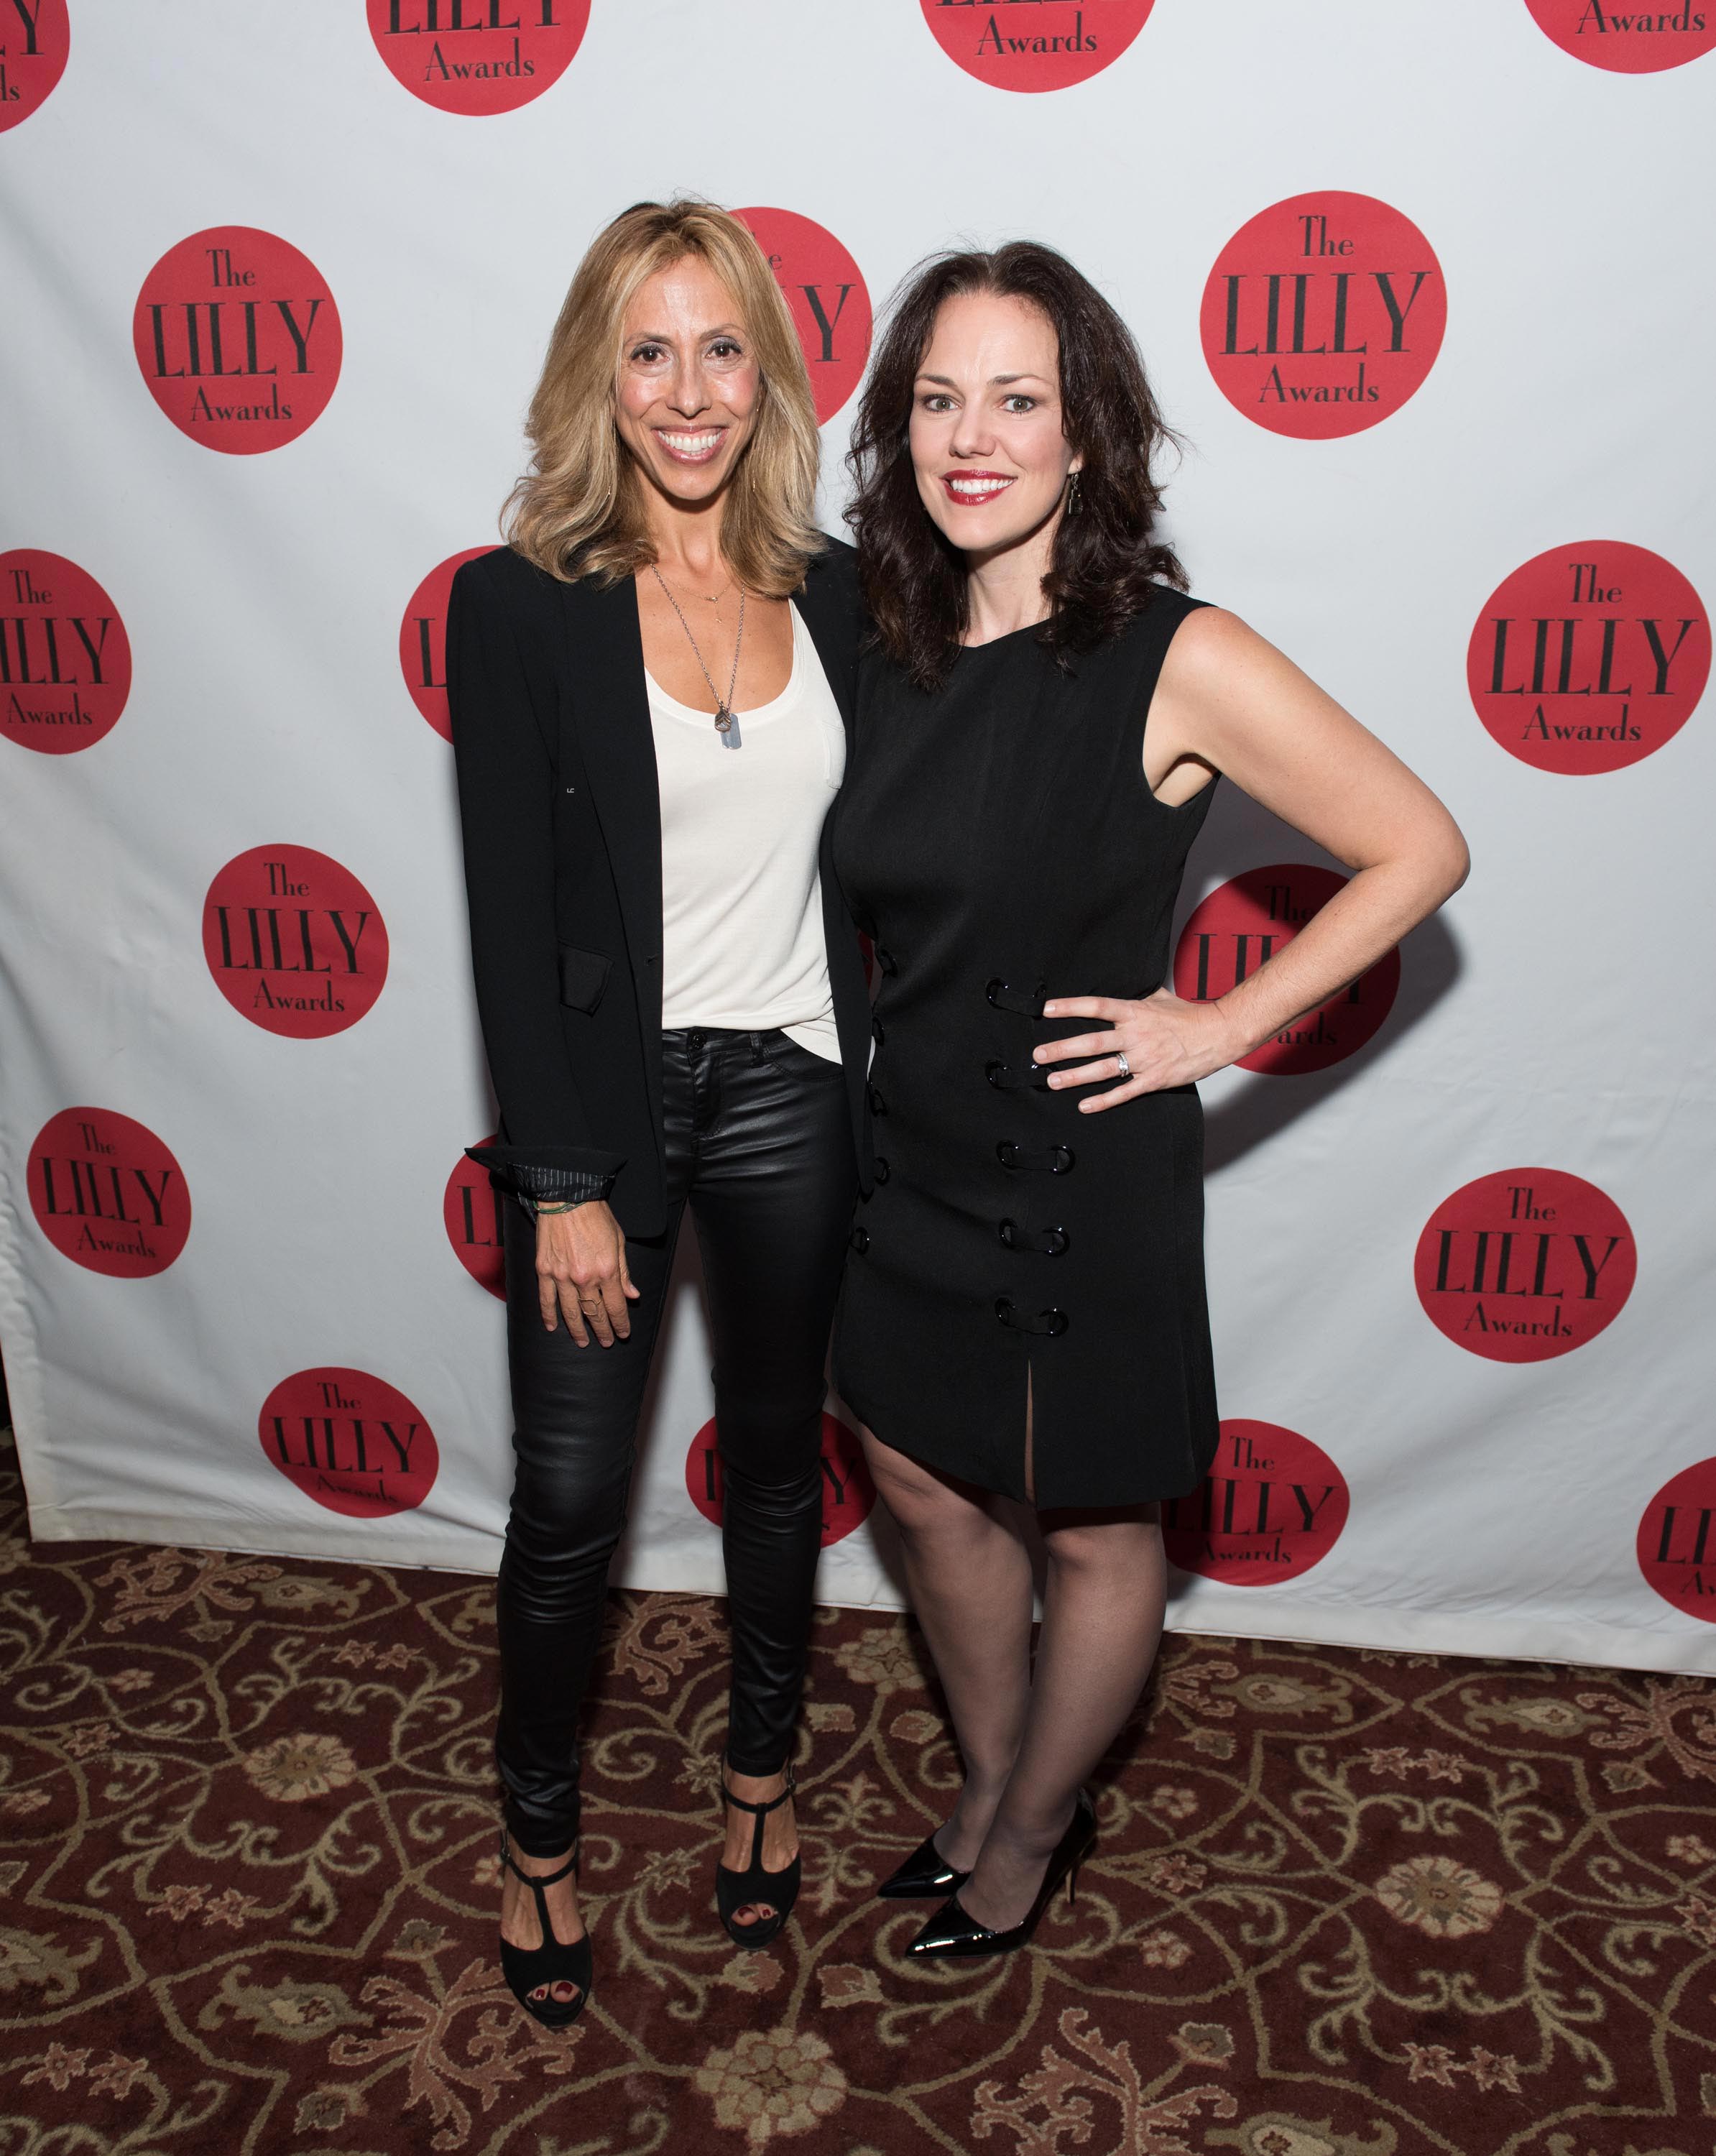 Amanda Green attends the 4th annual Lilly Awards Broadway Cabaret